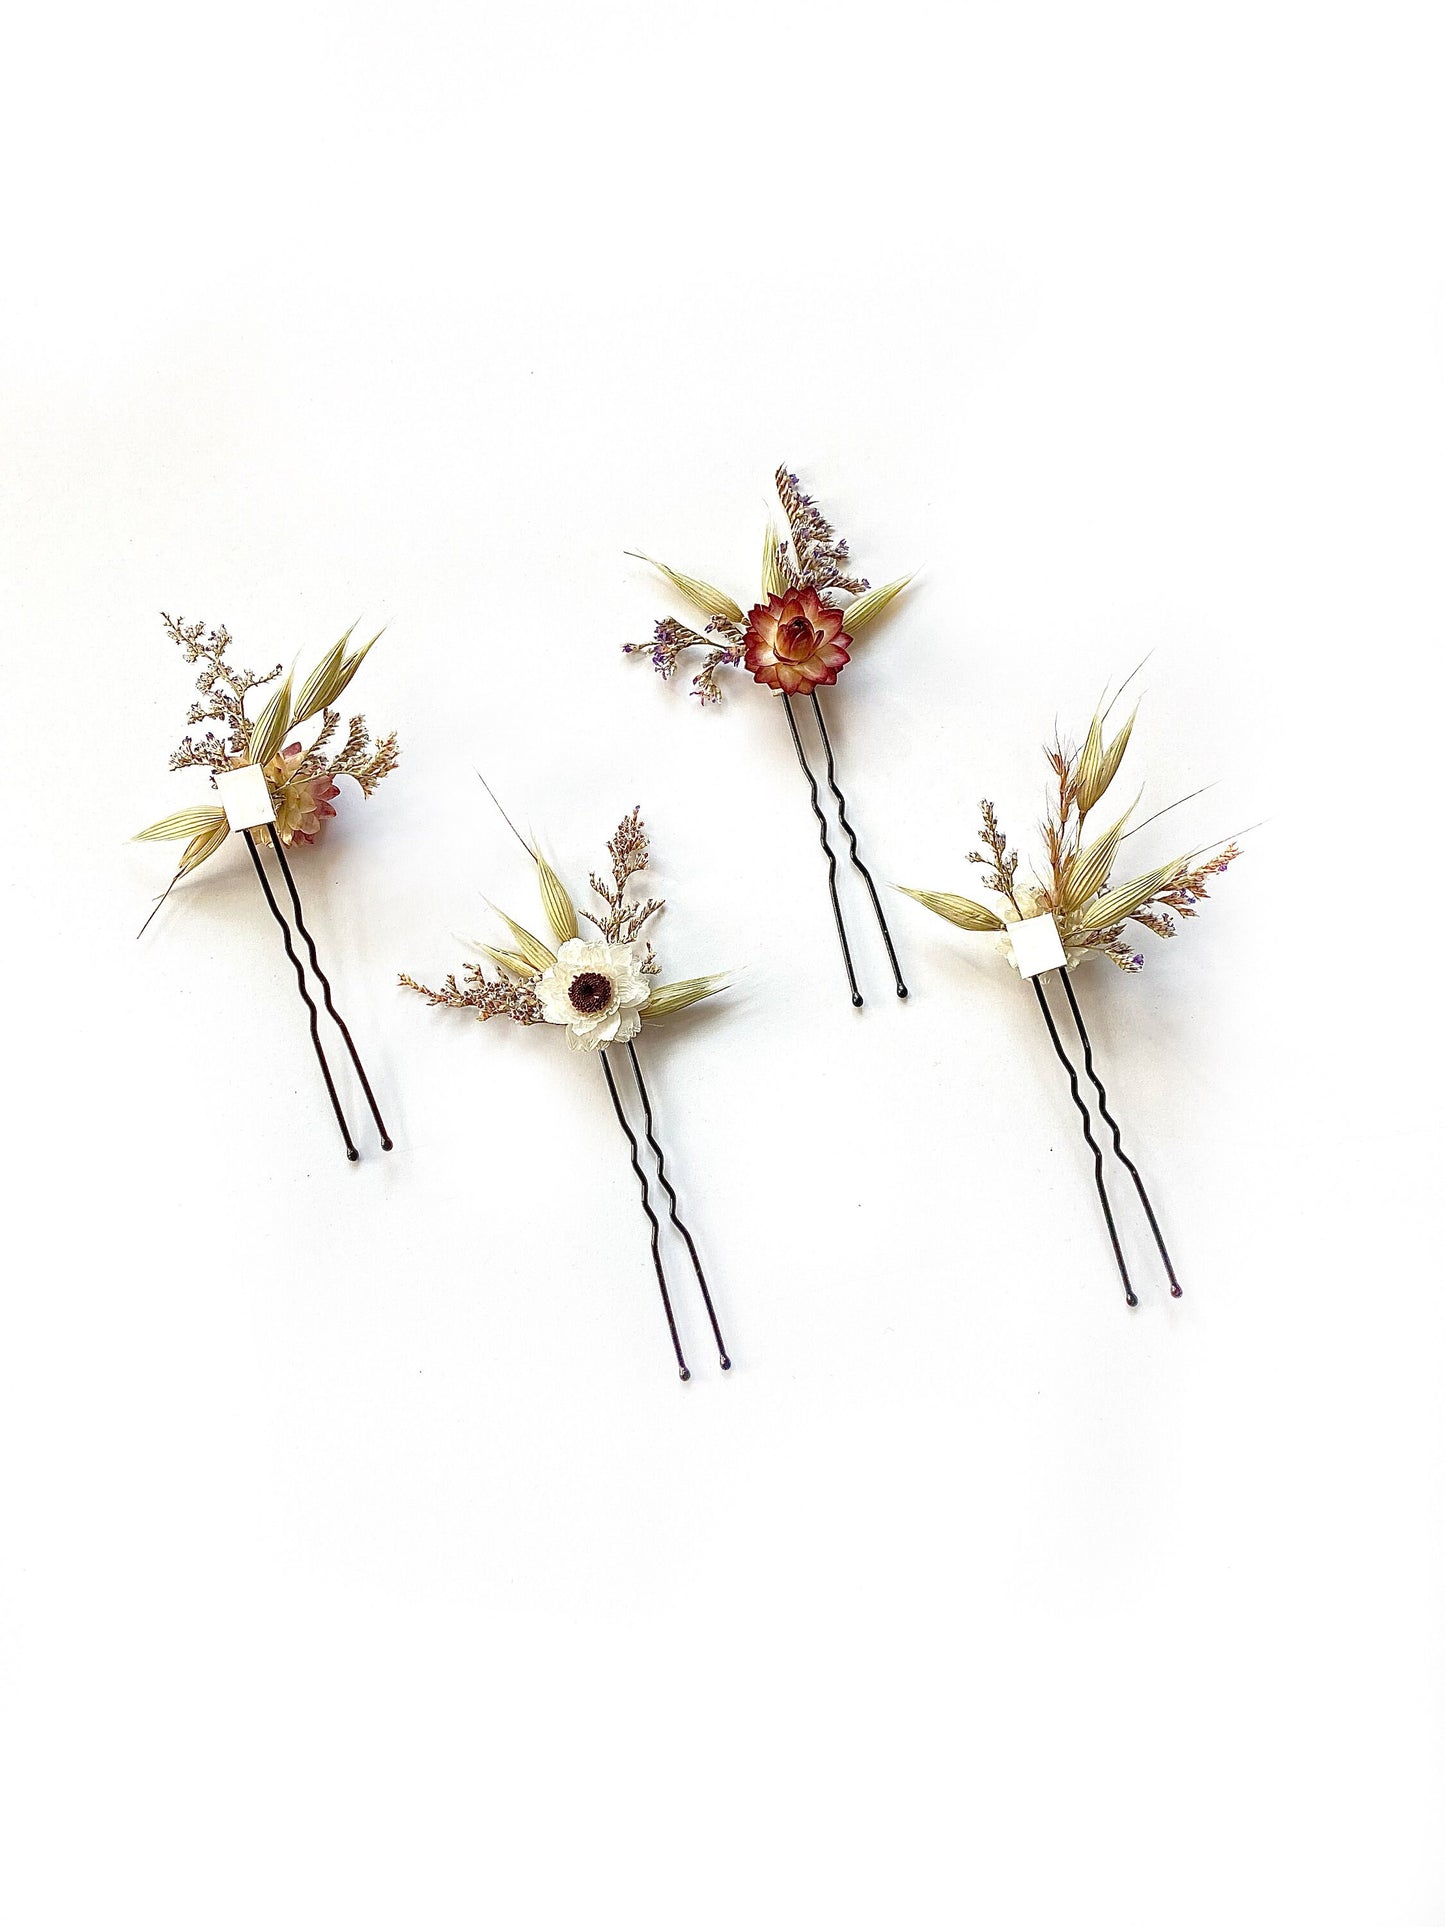 Hair Pins, Hair Comb, Wedding Accessory, Floral Comb, Preserved and Dried Flowers, Cute, Prom, Hair Accessory, Simple, Bridal,